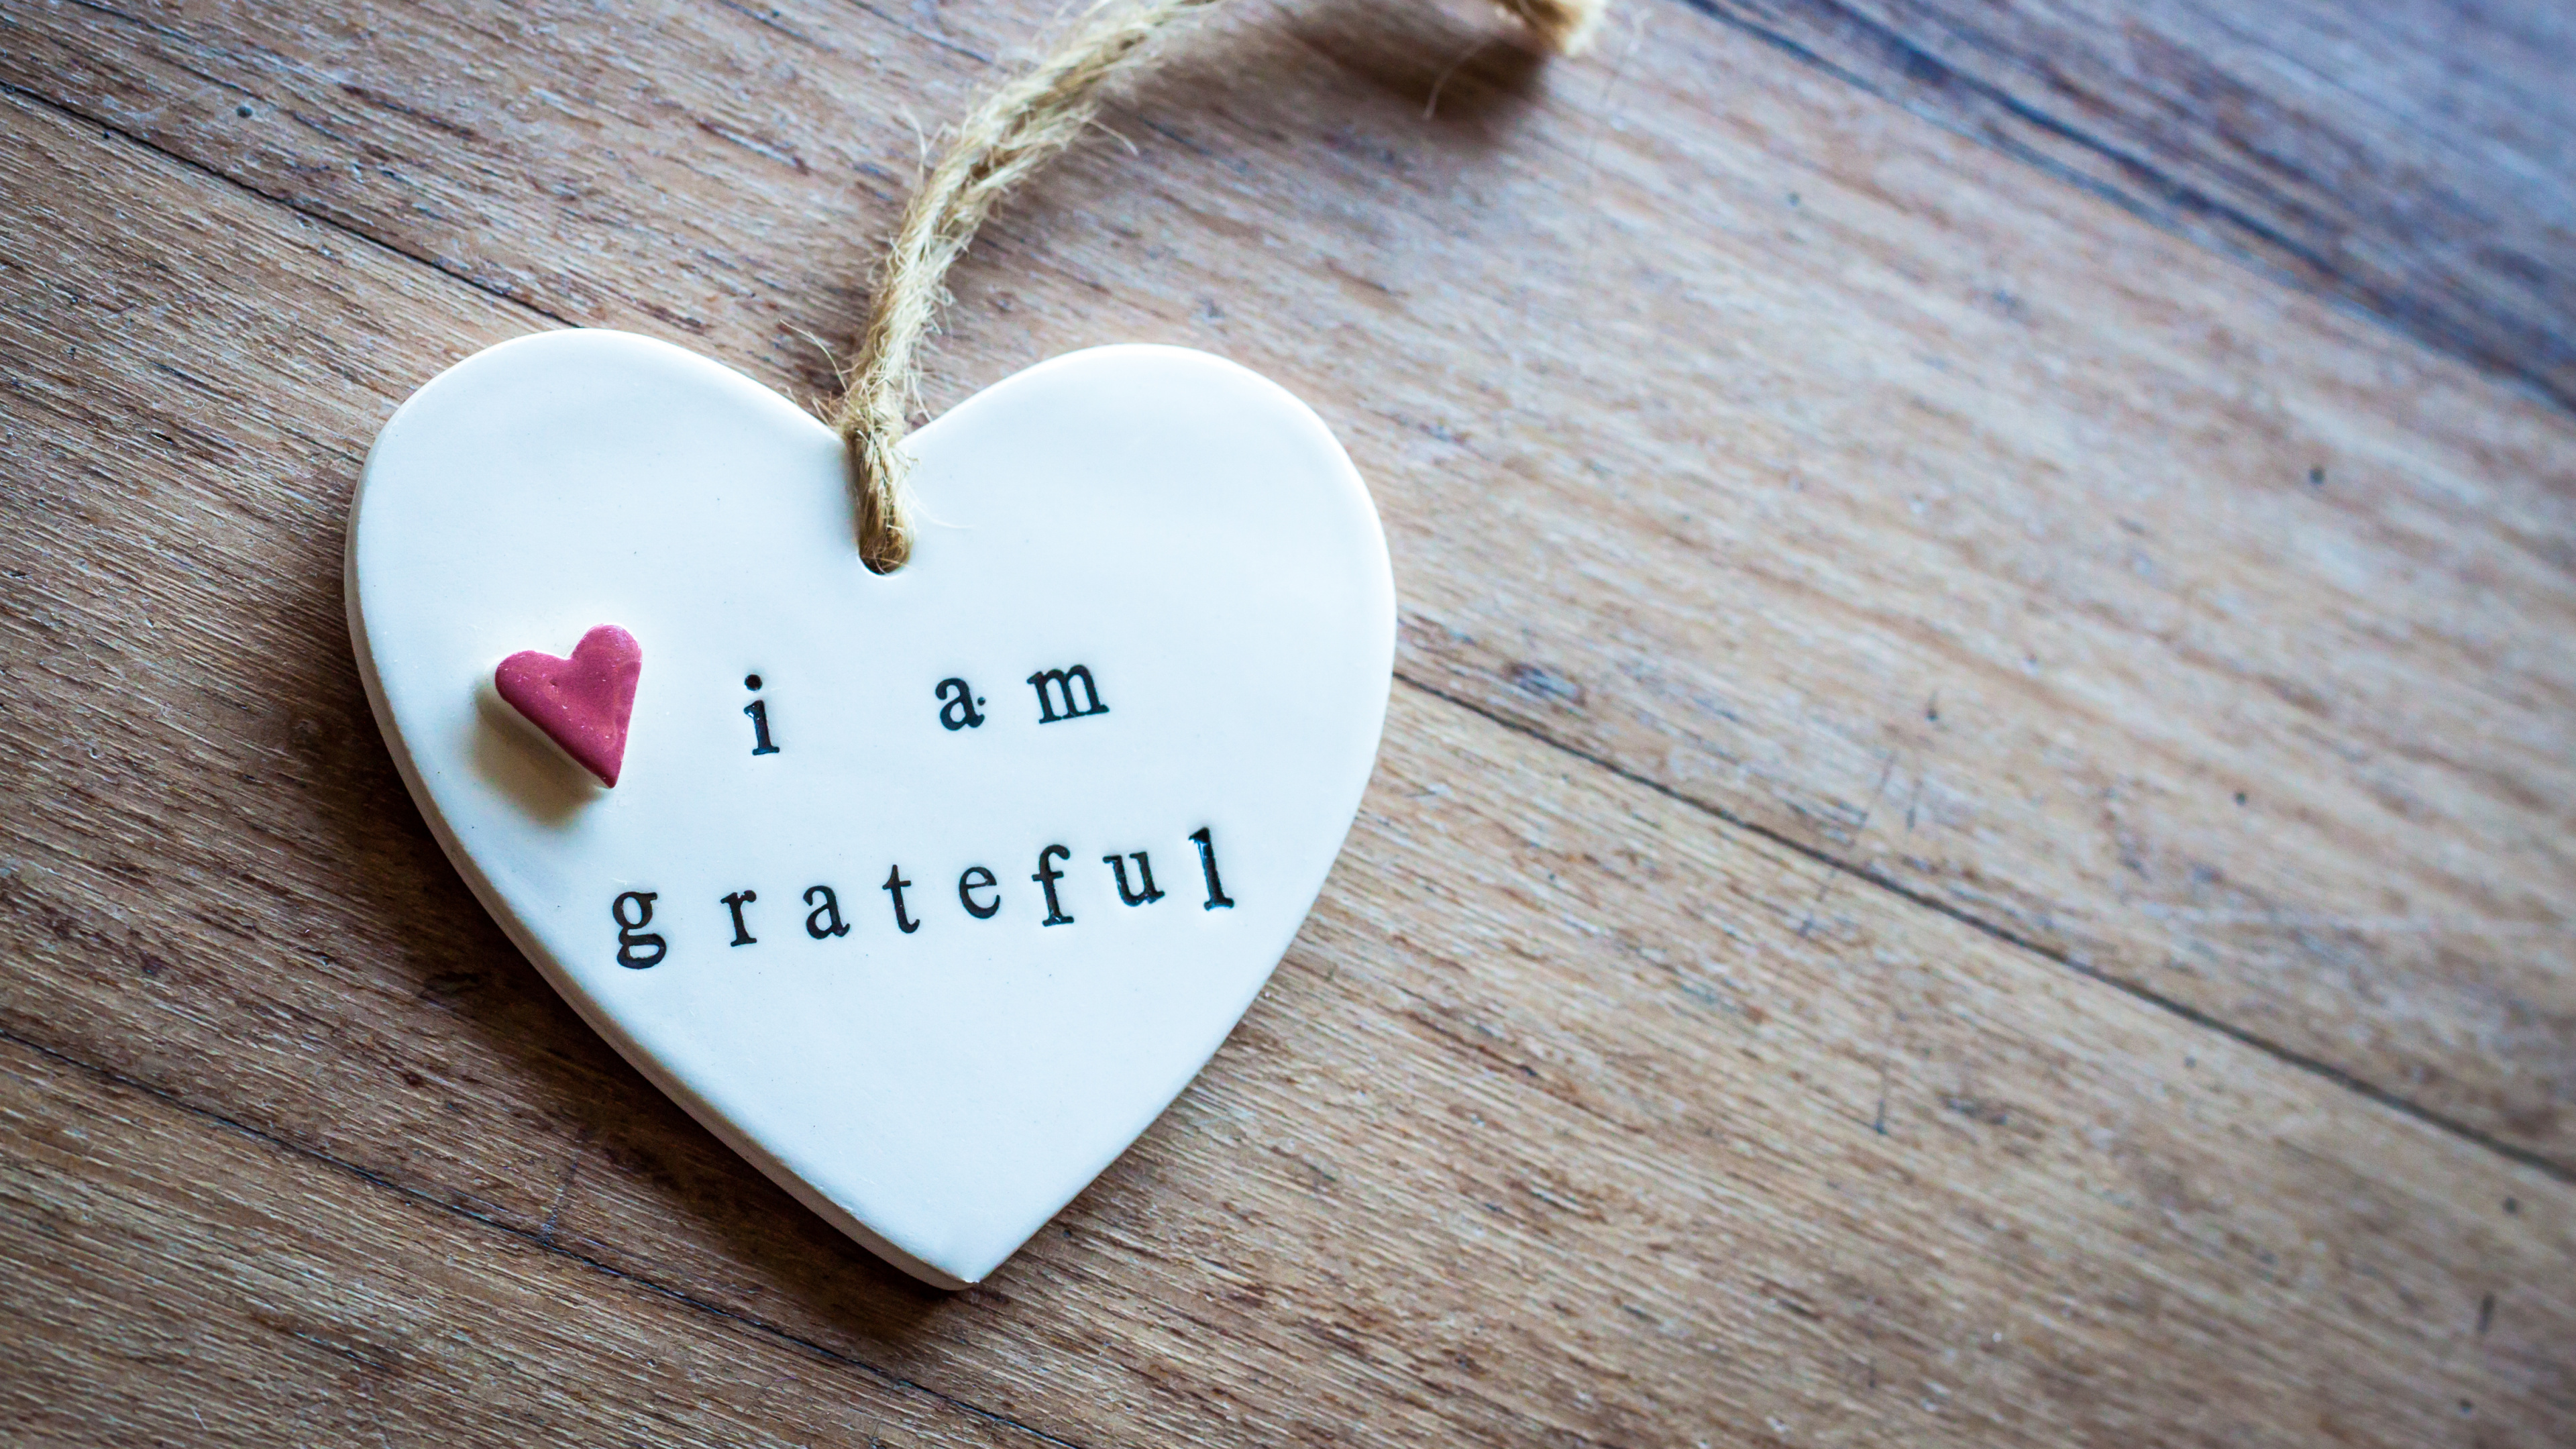 Gratitude: A heart-shaped charm, The expression of appreciation, Thankfulness, Inspiration. 3840x2160 4K Background.